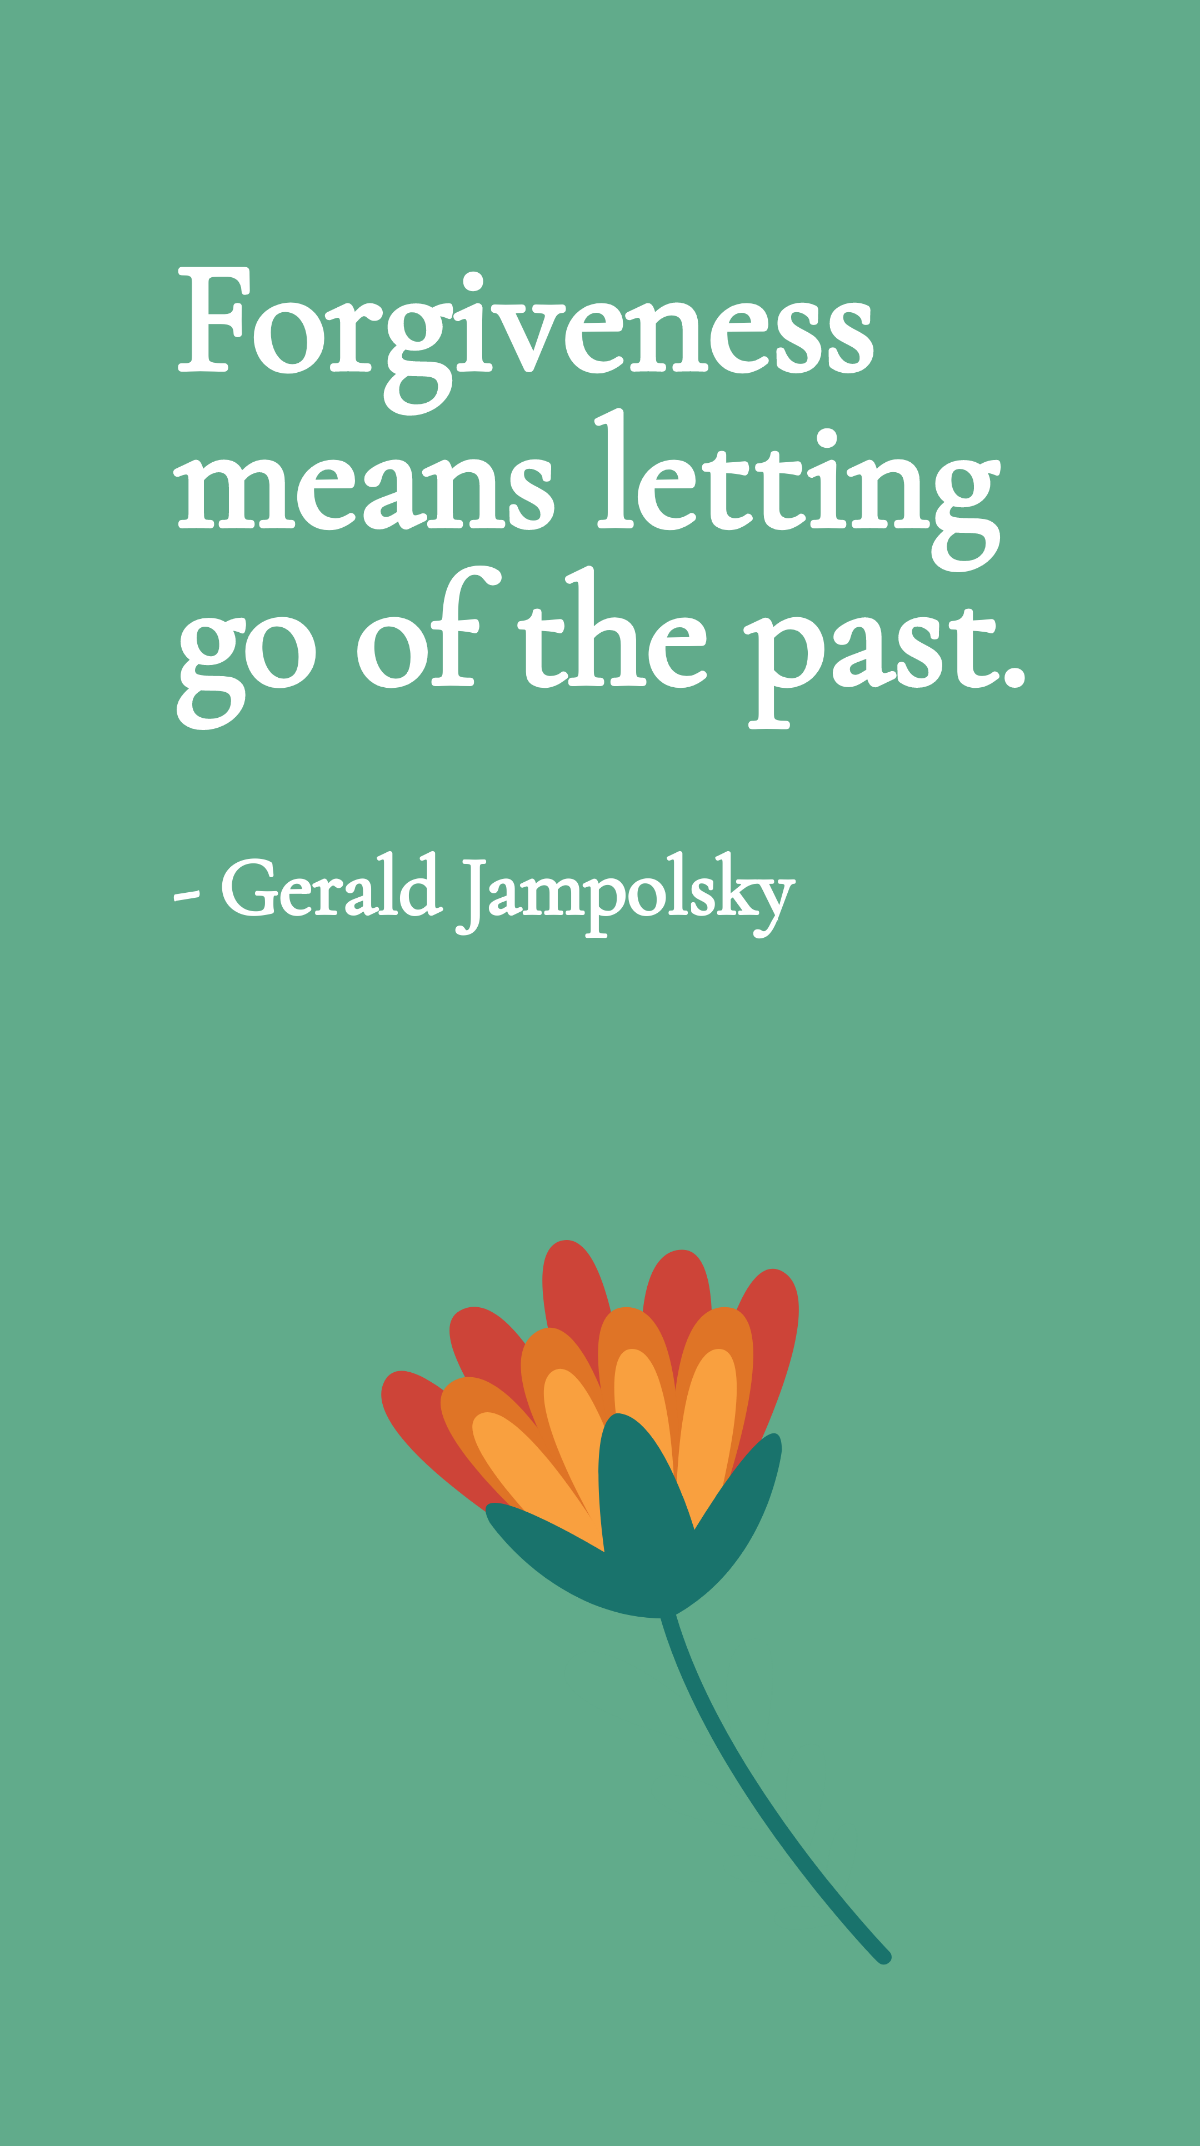 Gerald Jampolsky - Forgiveness means letting go of the past. Template